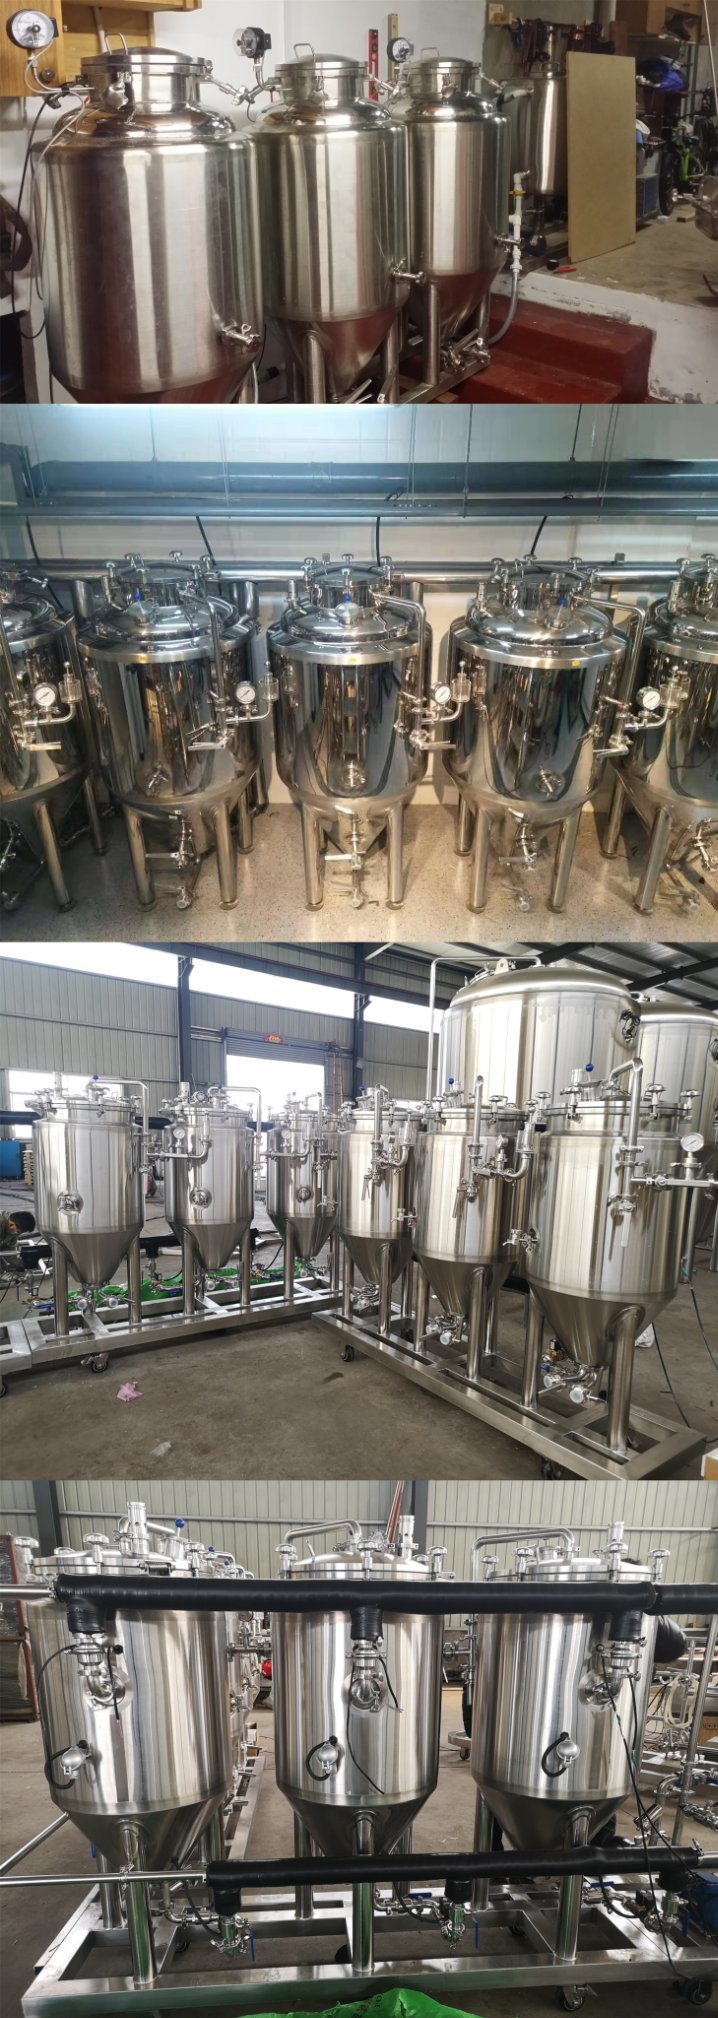 Home Pub Brewery, Turnkey Brewery 500L Beer Brewery Equipment Turnkey Project